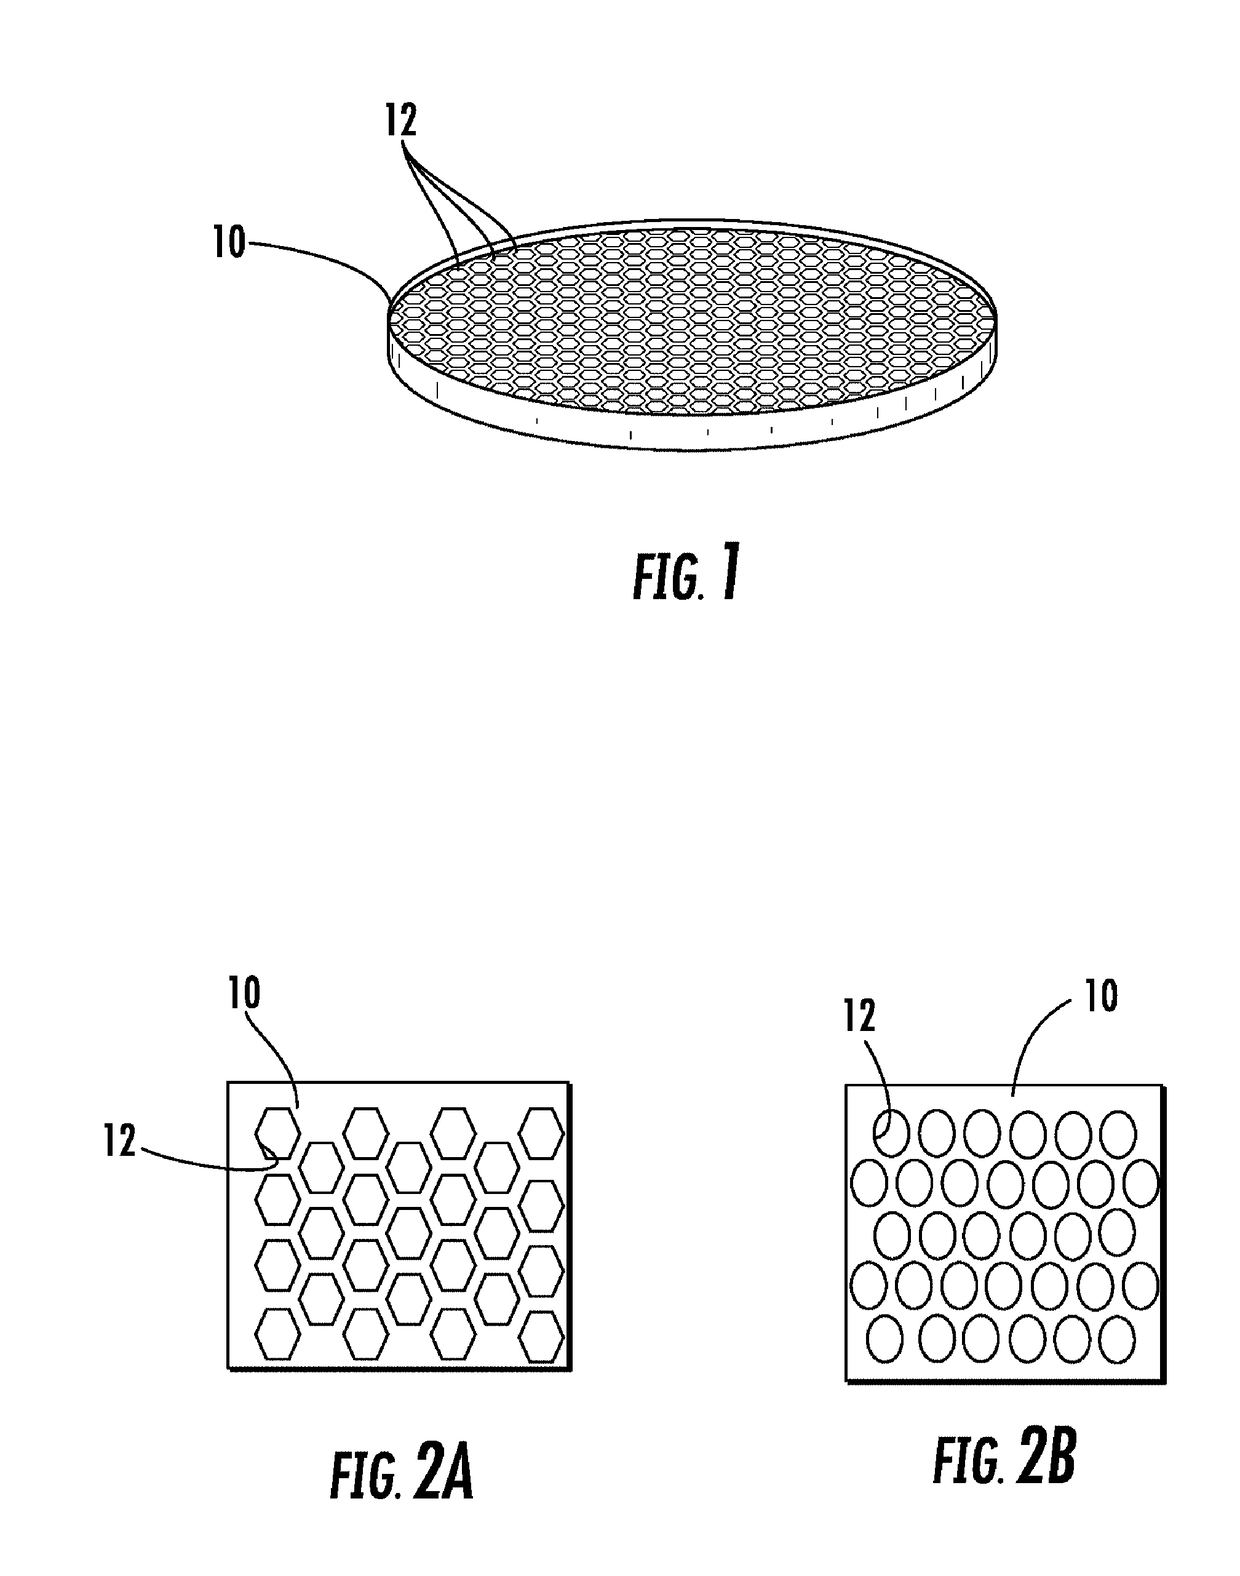 Method and apparatus for creating coherent bundle of scintillating fibers